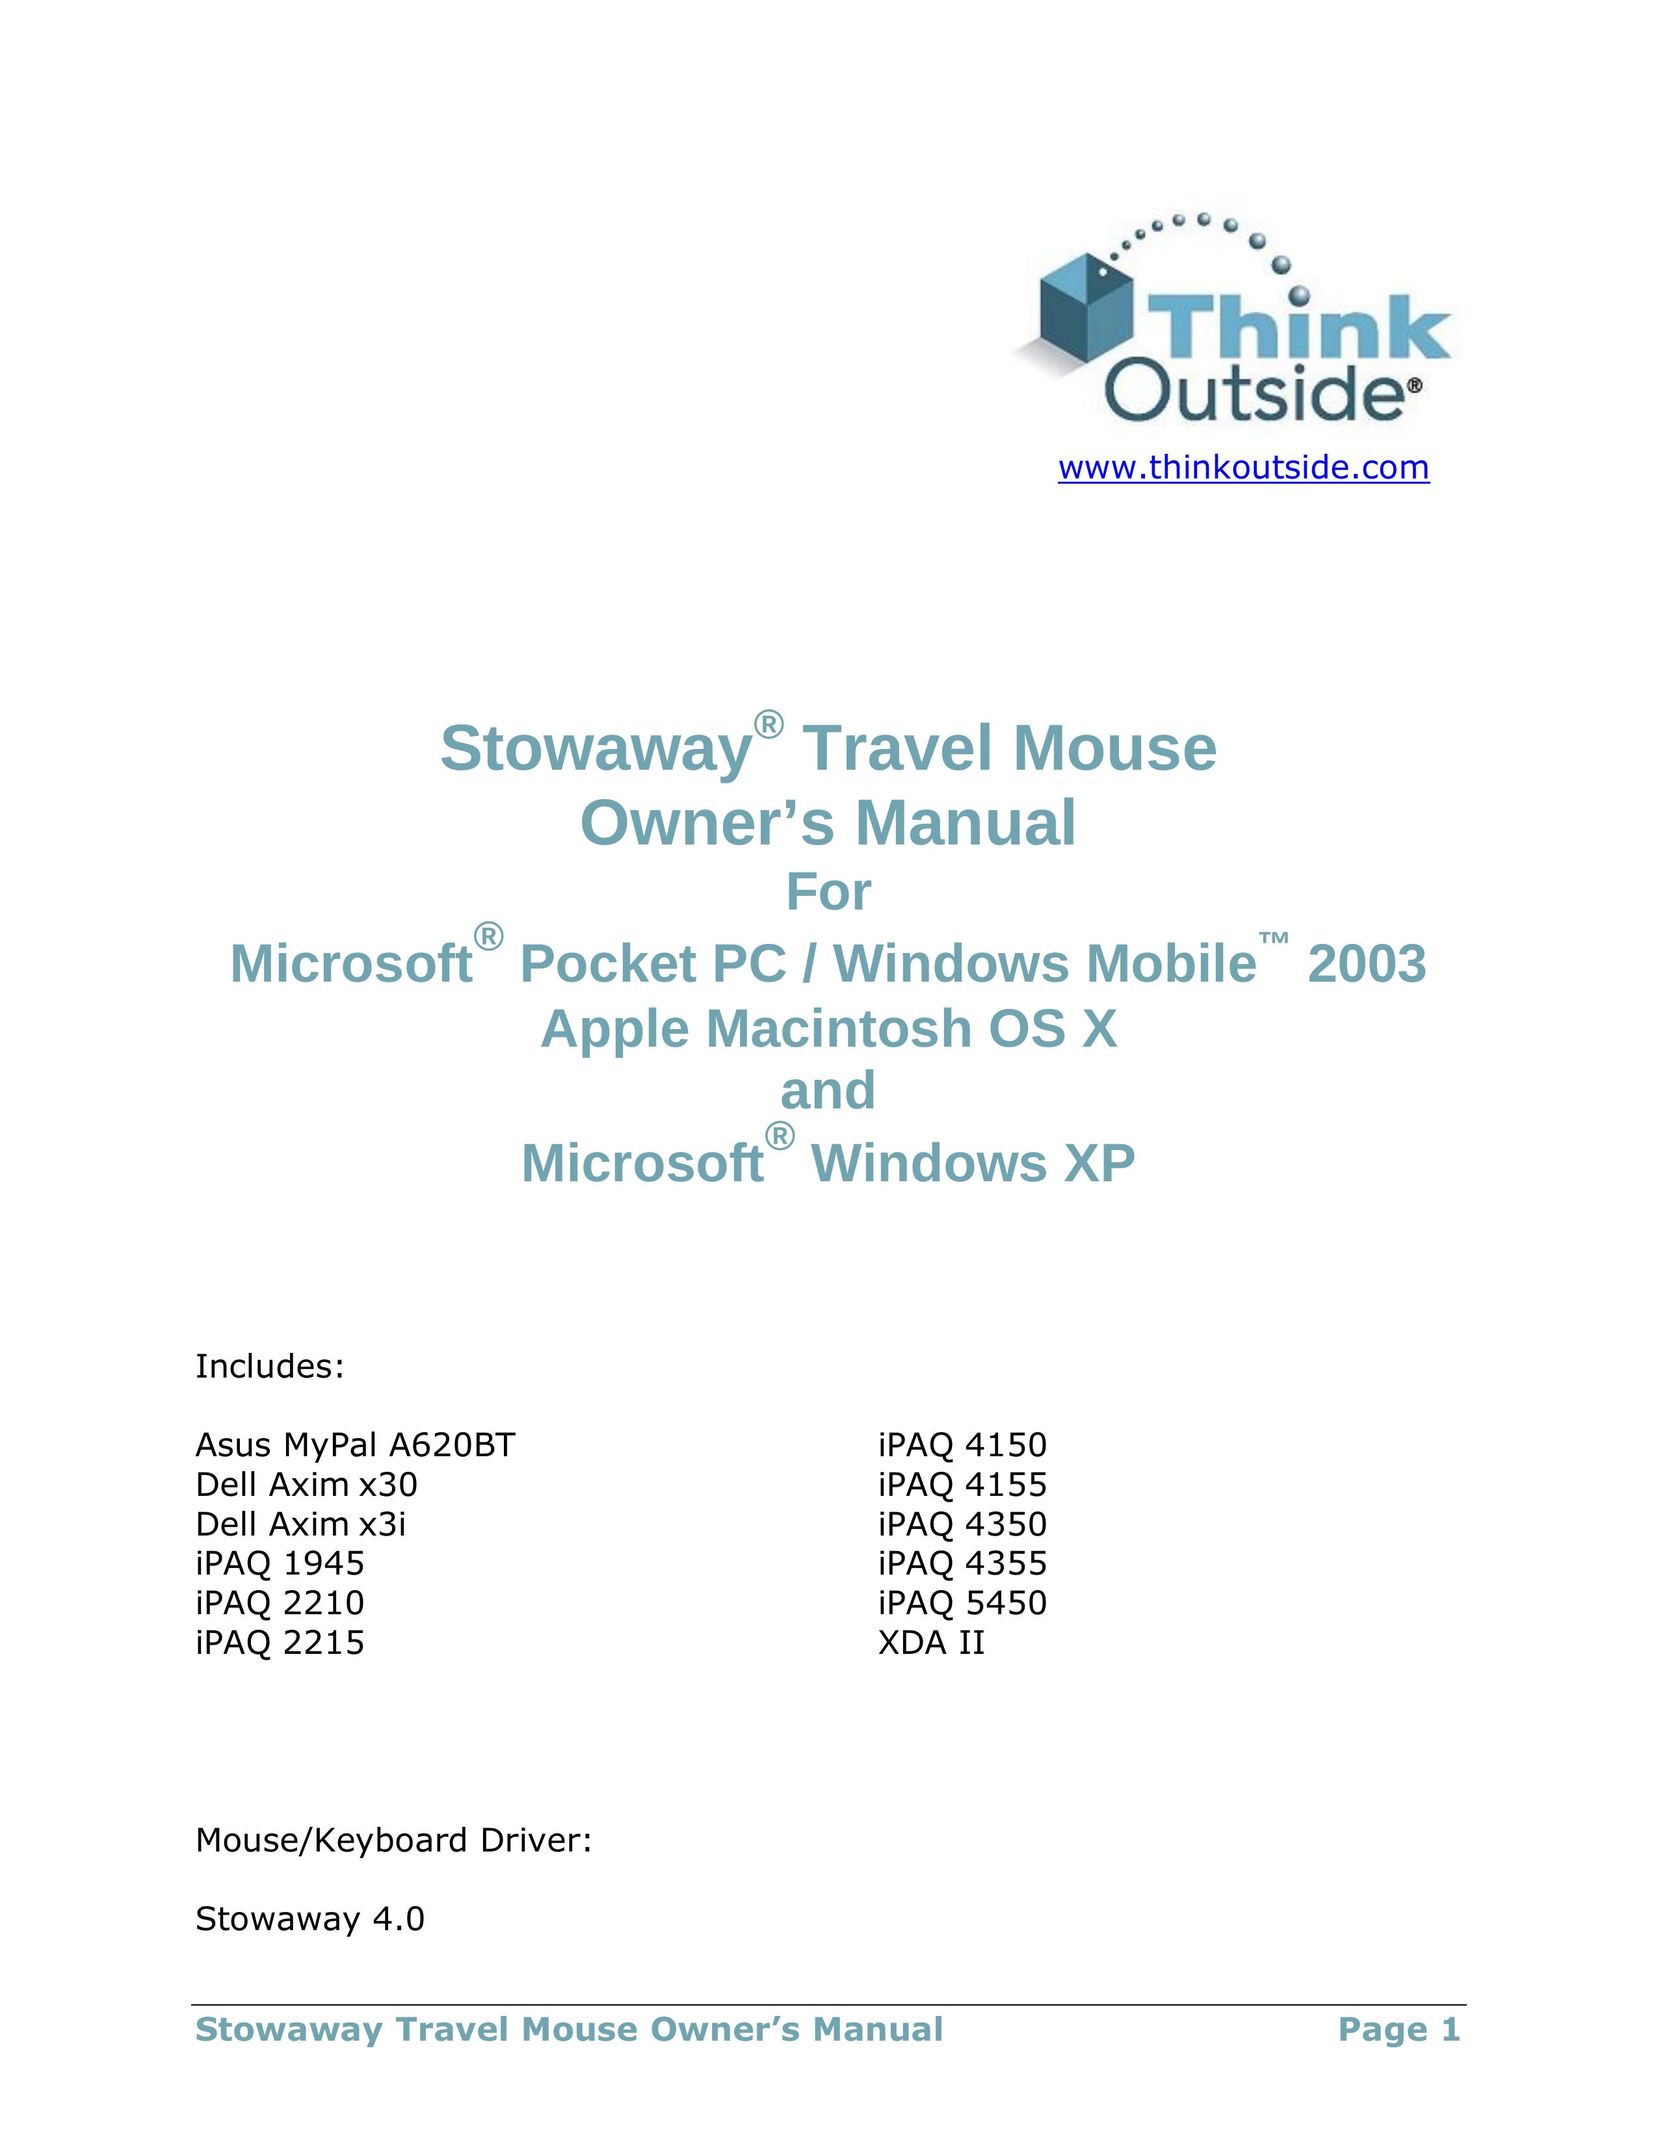 Think Outside Travel Mouse (for iPAQ 2215) PDAs & Smartphones User Manual